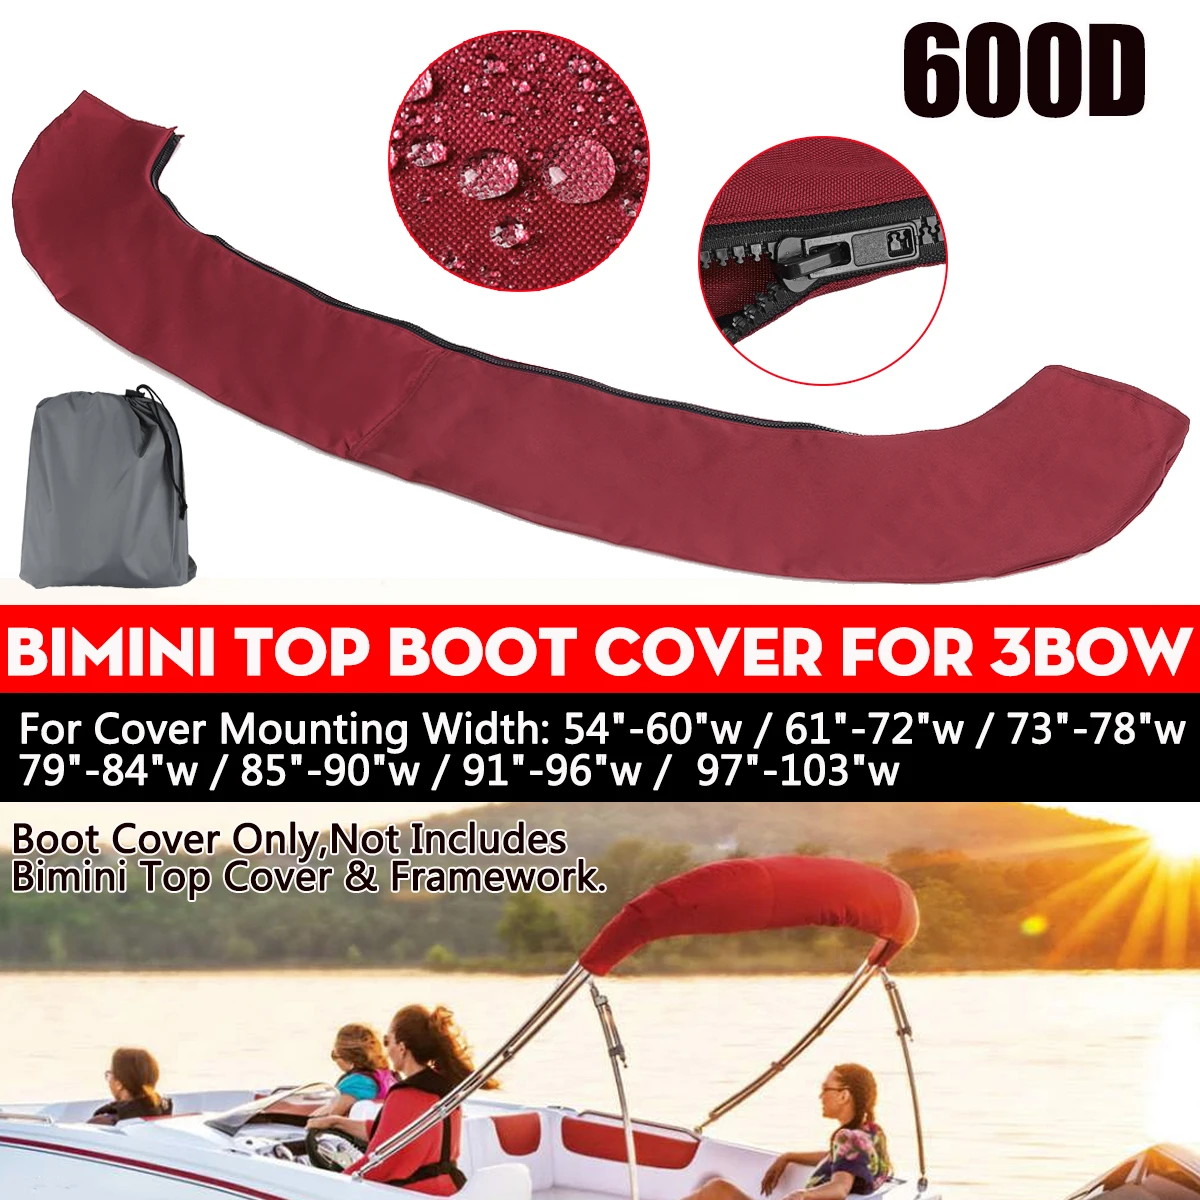 600D 3 Bow Bimini Top Boot Cover No Frame Waterproof Yacht Boat Cover with Zipper Anti UV Dustproof Cover Marine Accessories 46x40x45 inch boat cover yacht boat center console cover mat waterproof dustproof anti uv keep dry boat accessories